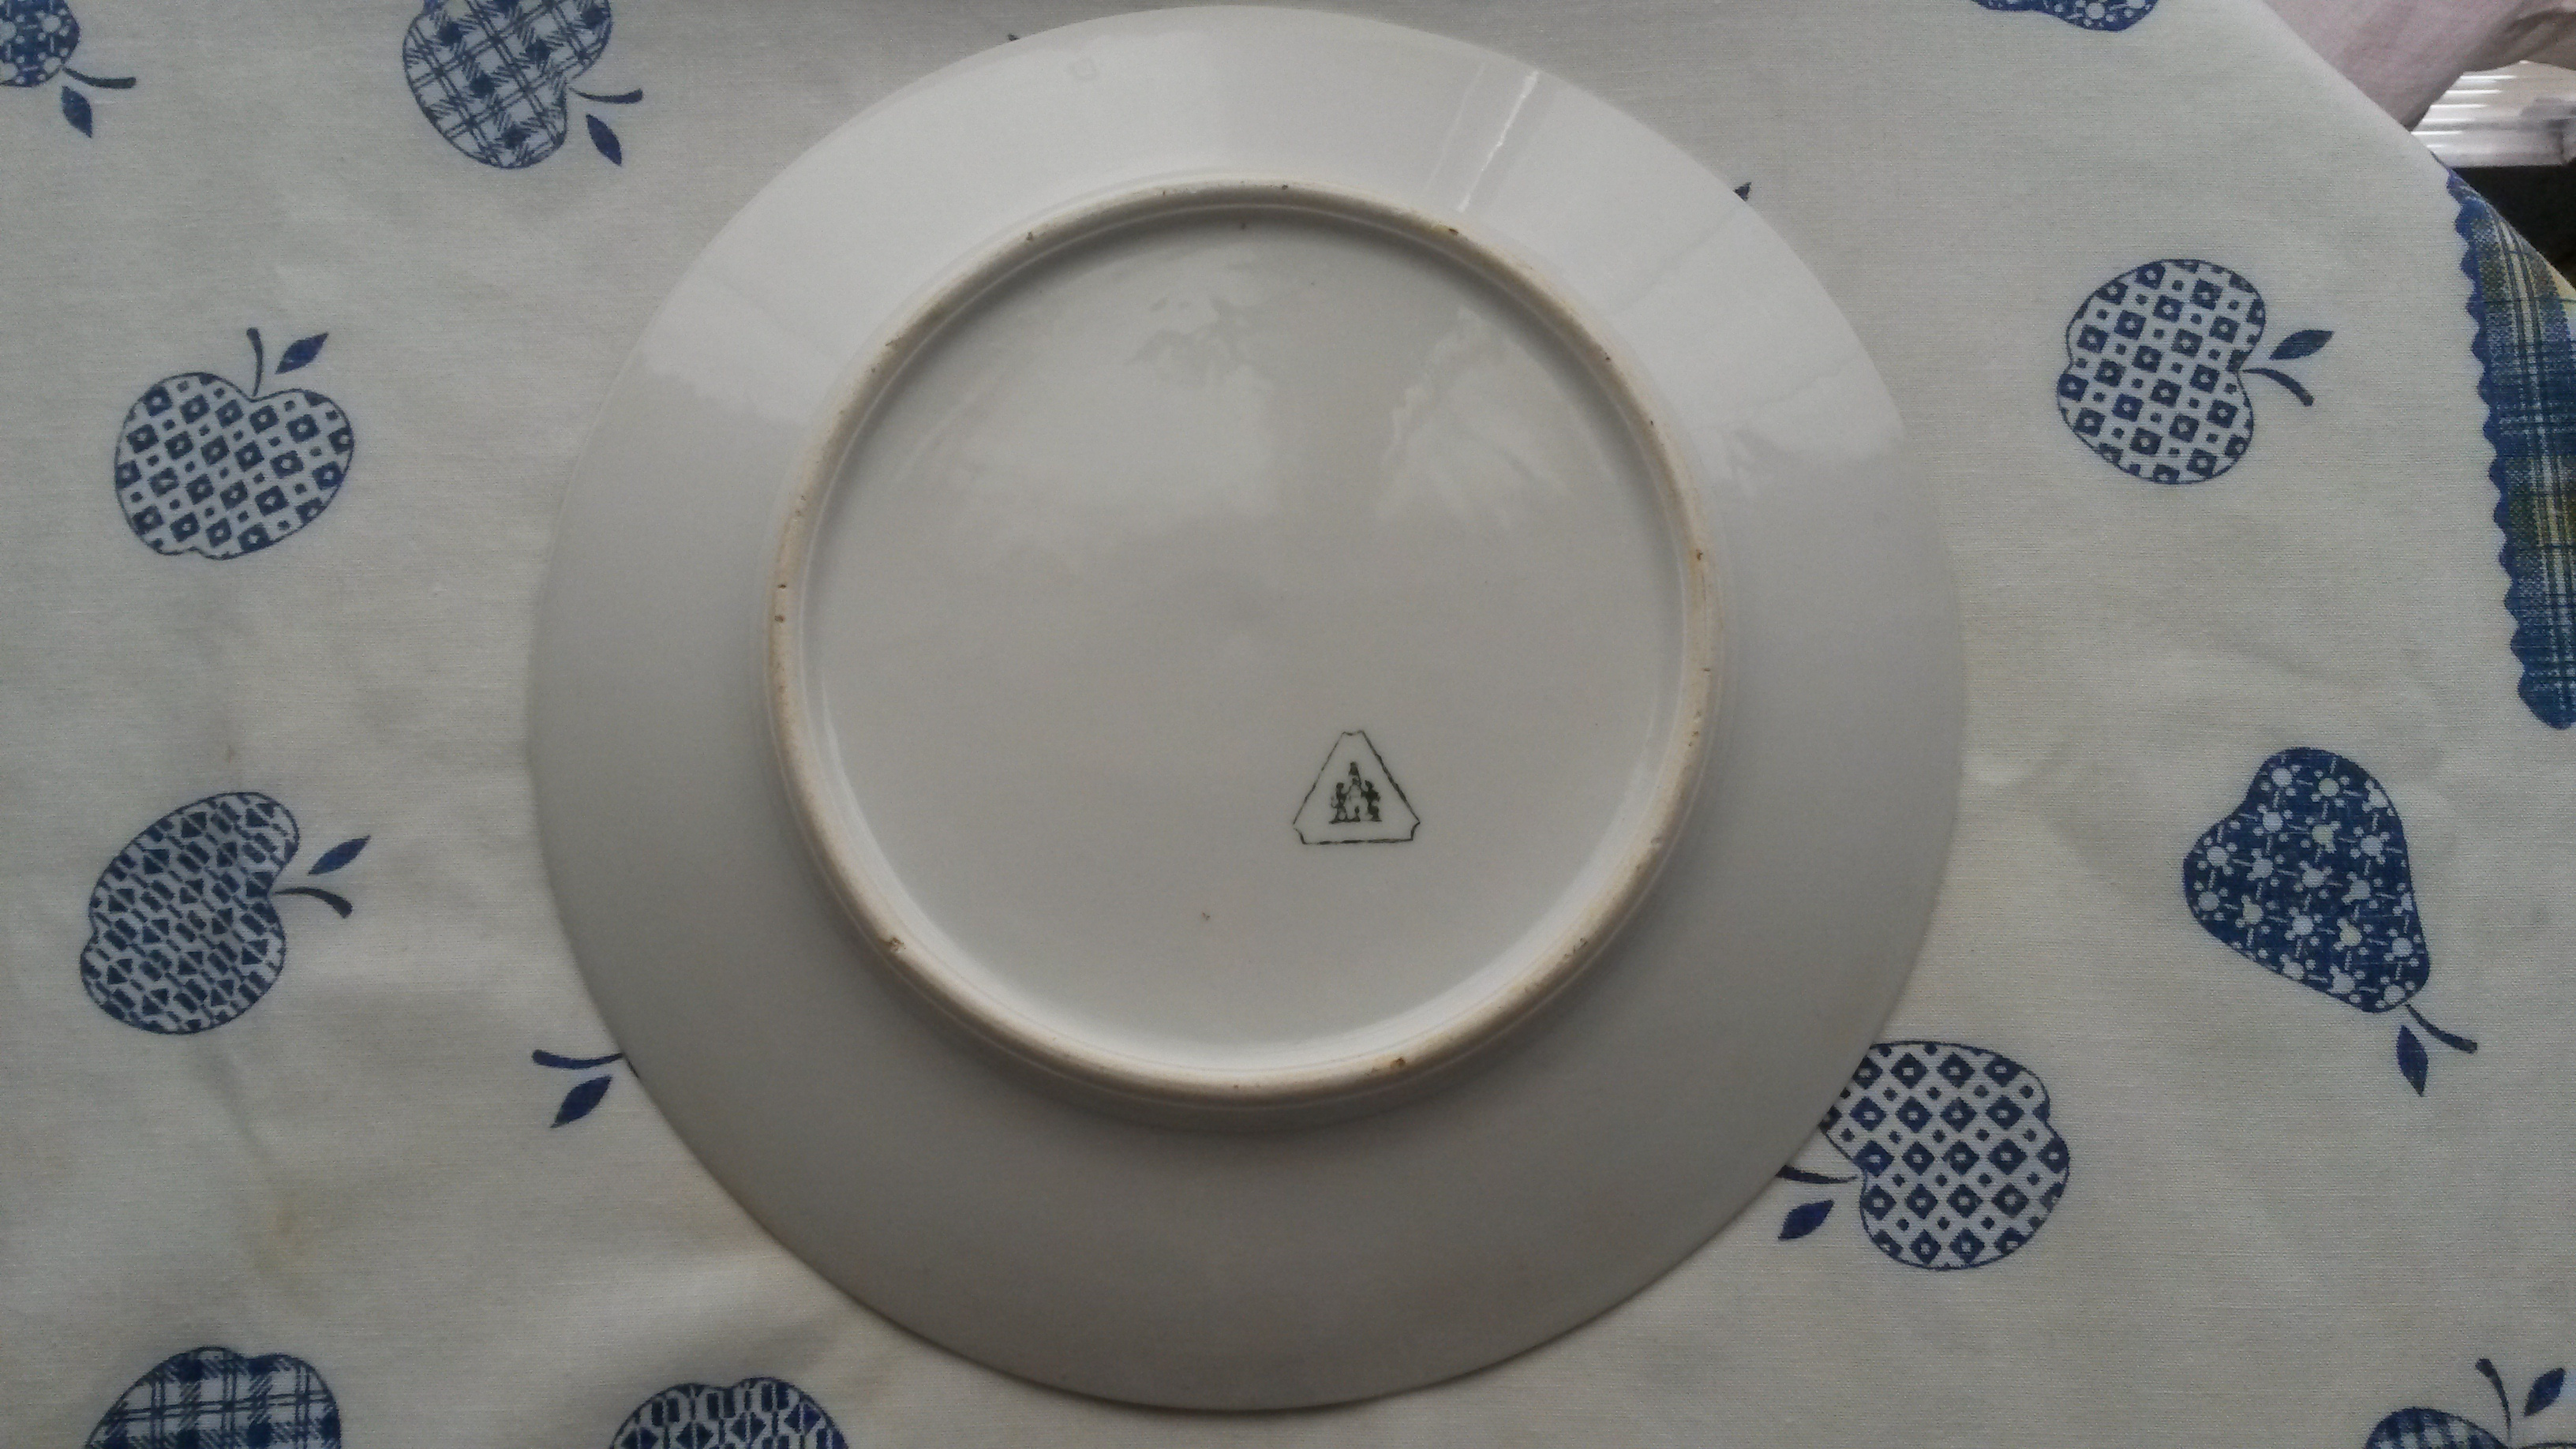 Help on Unknown Mark on a Porcelain Dish! | Antiques Board